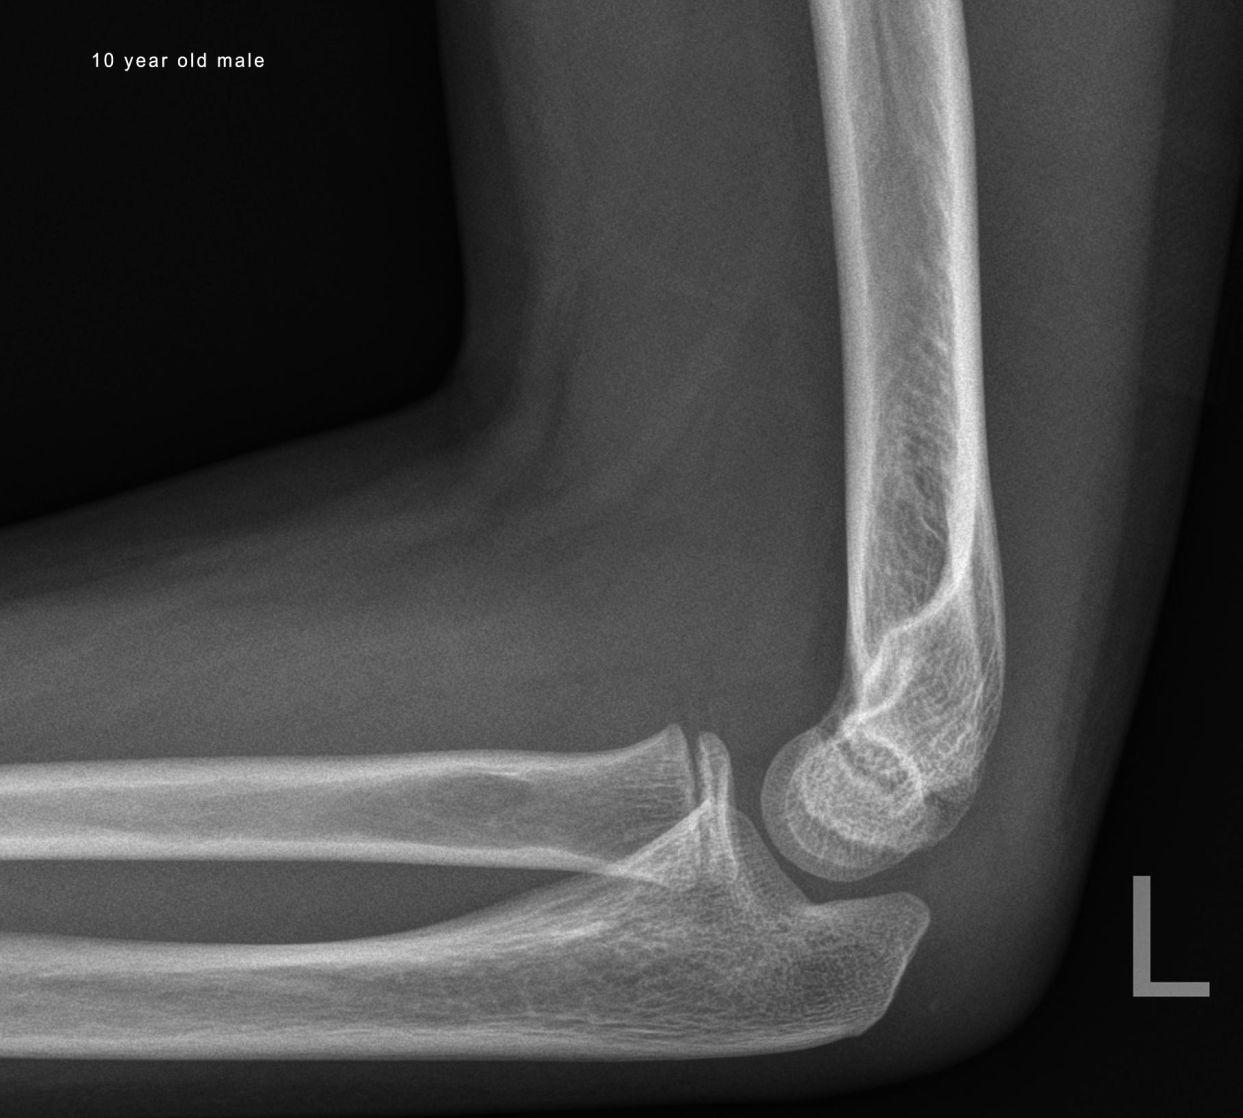 lateral elbow normal male 10 yrs